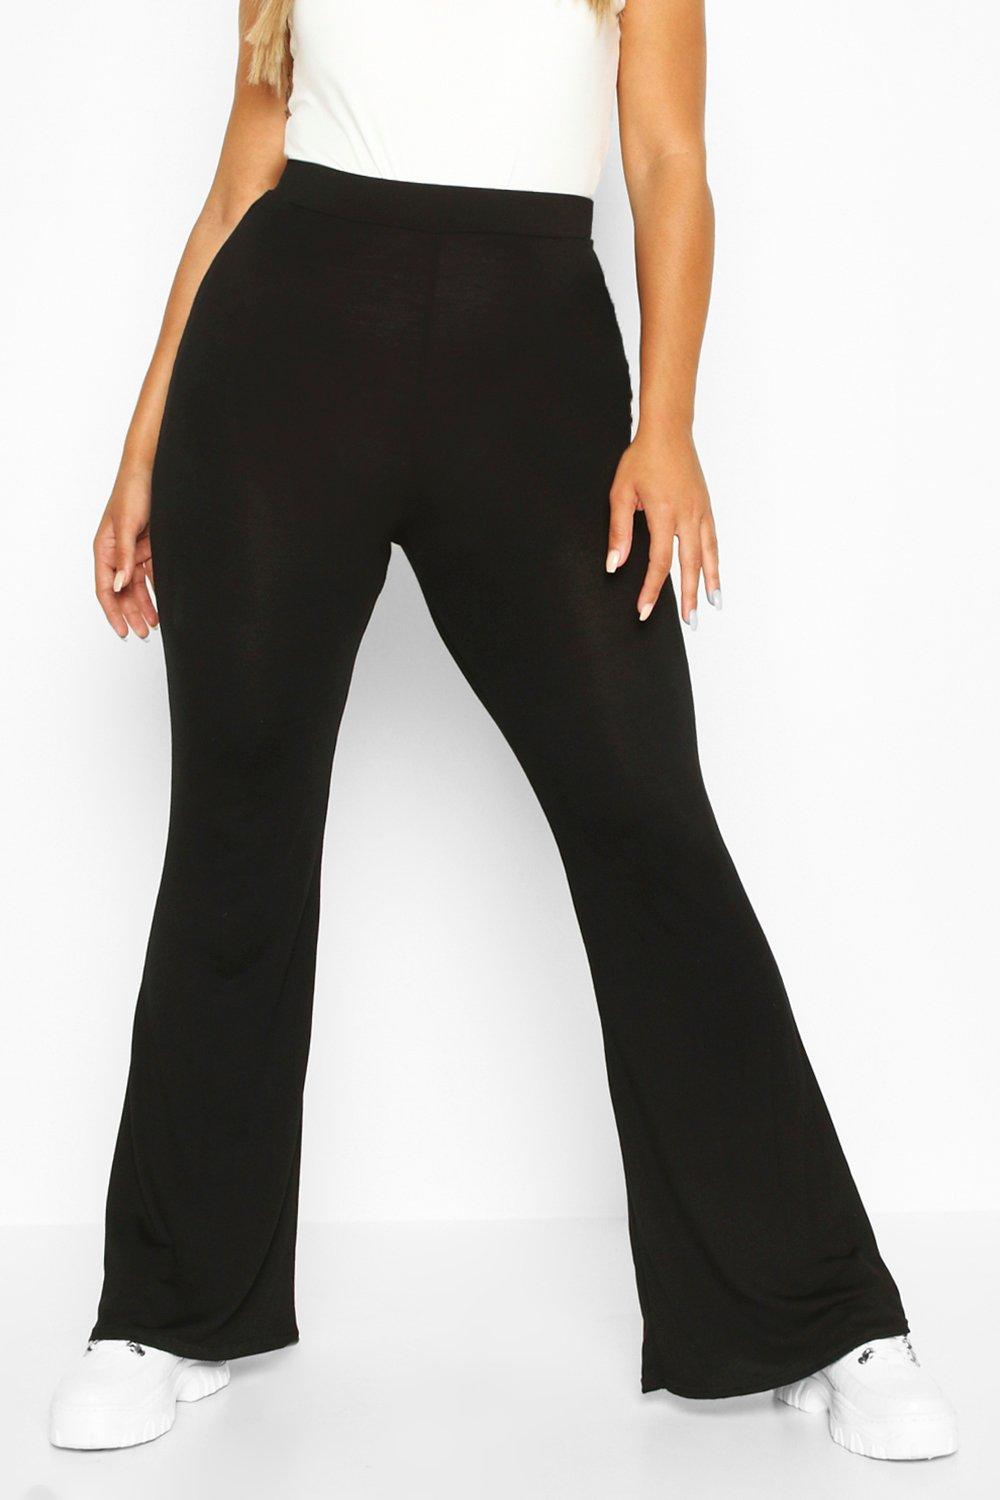 H&M Conscious Collection Jersey Pants black simple style Fashion Trousers Jersey Pants 